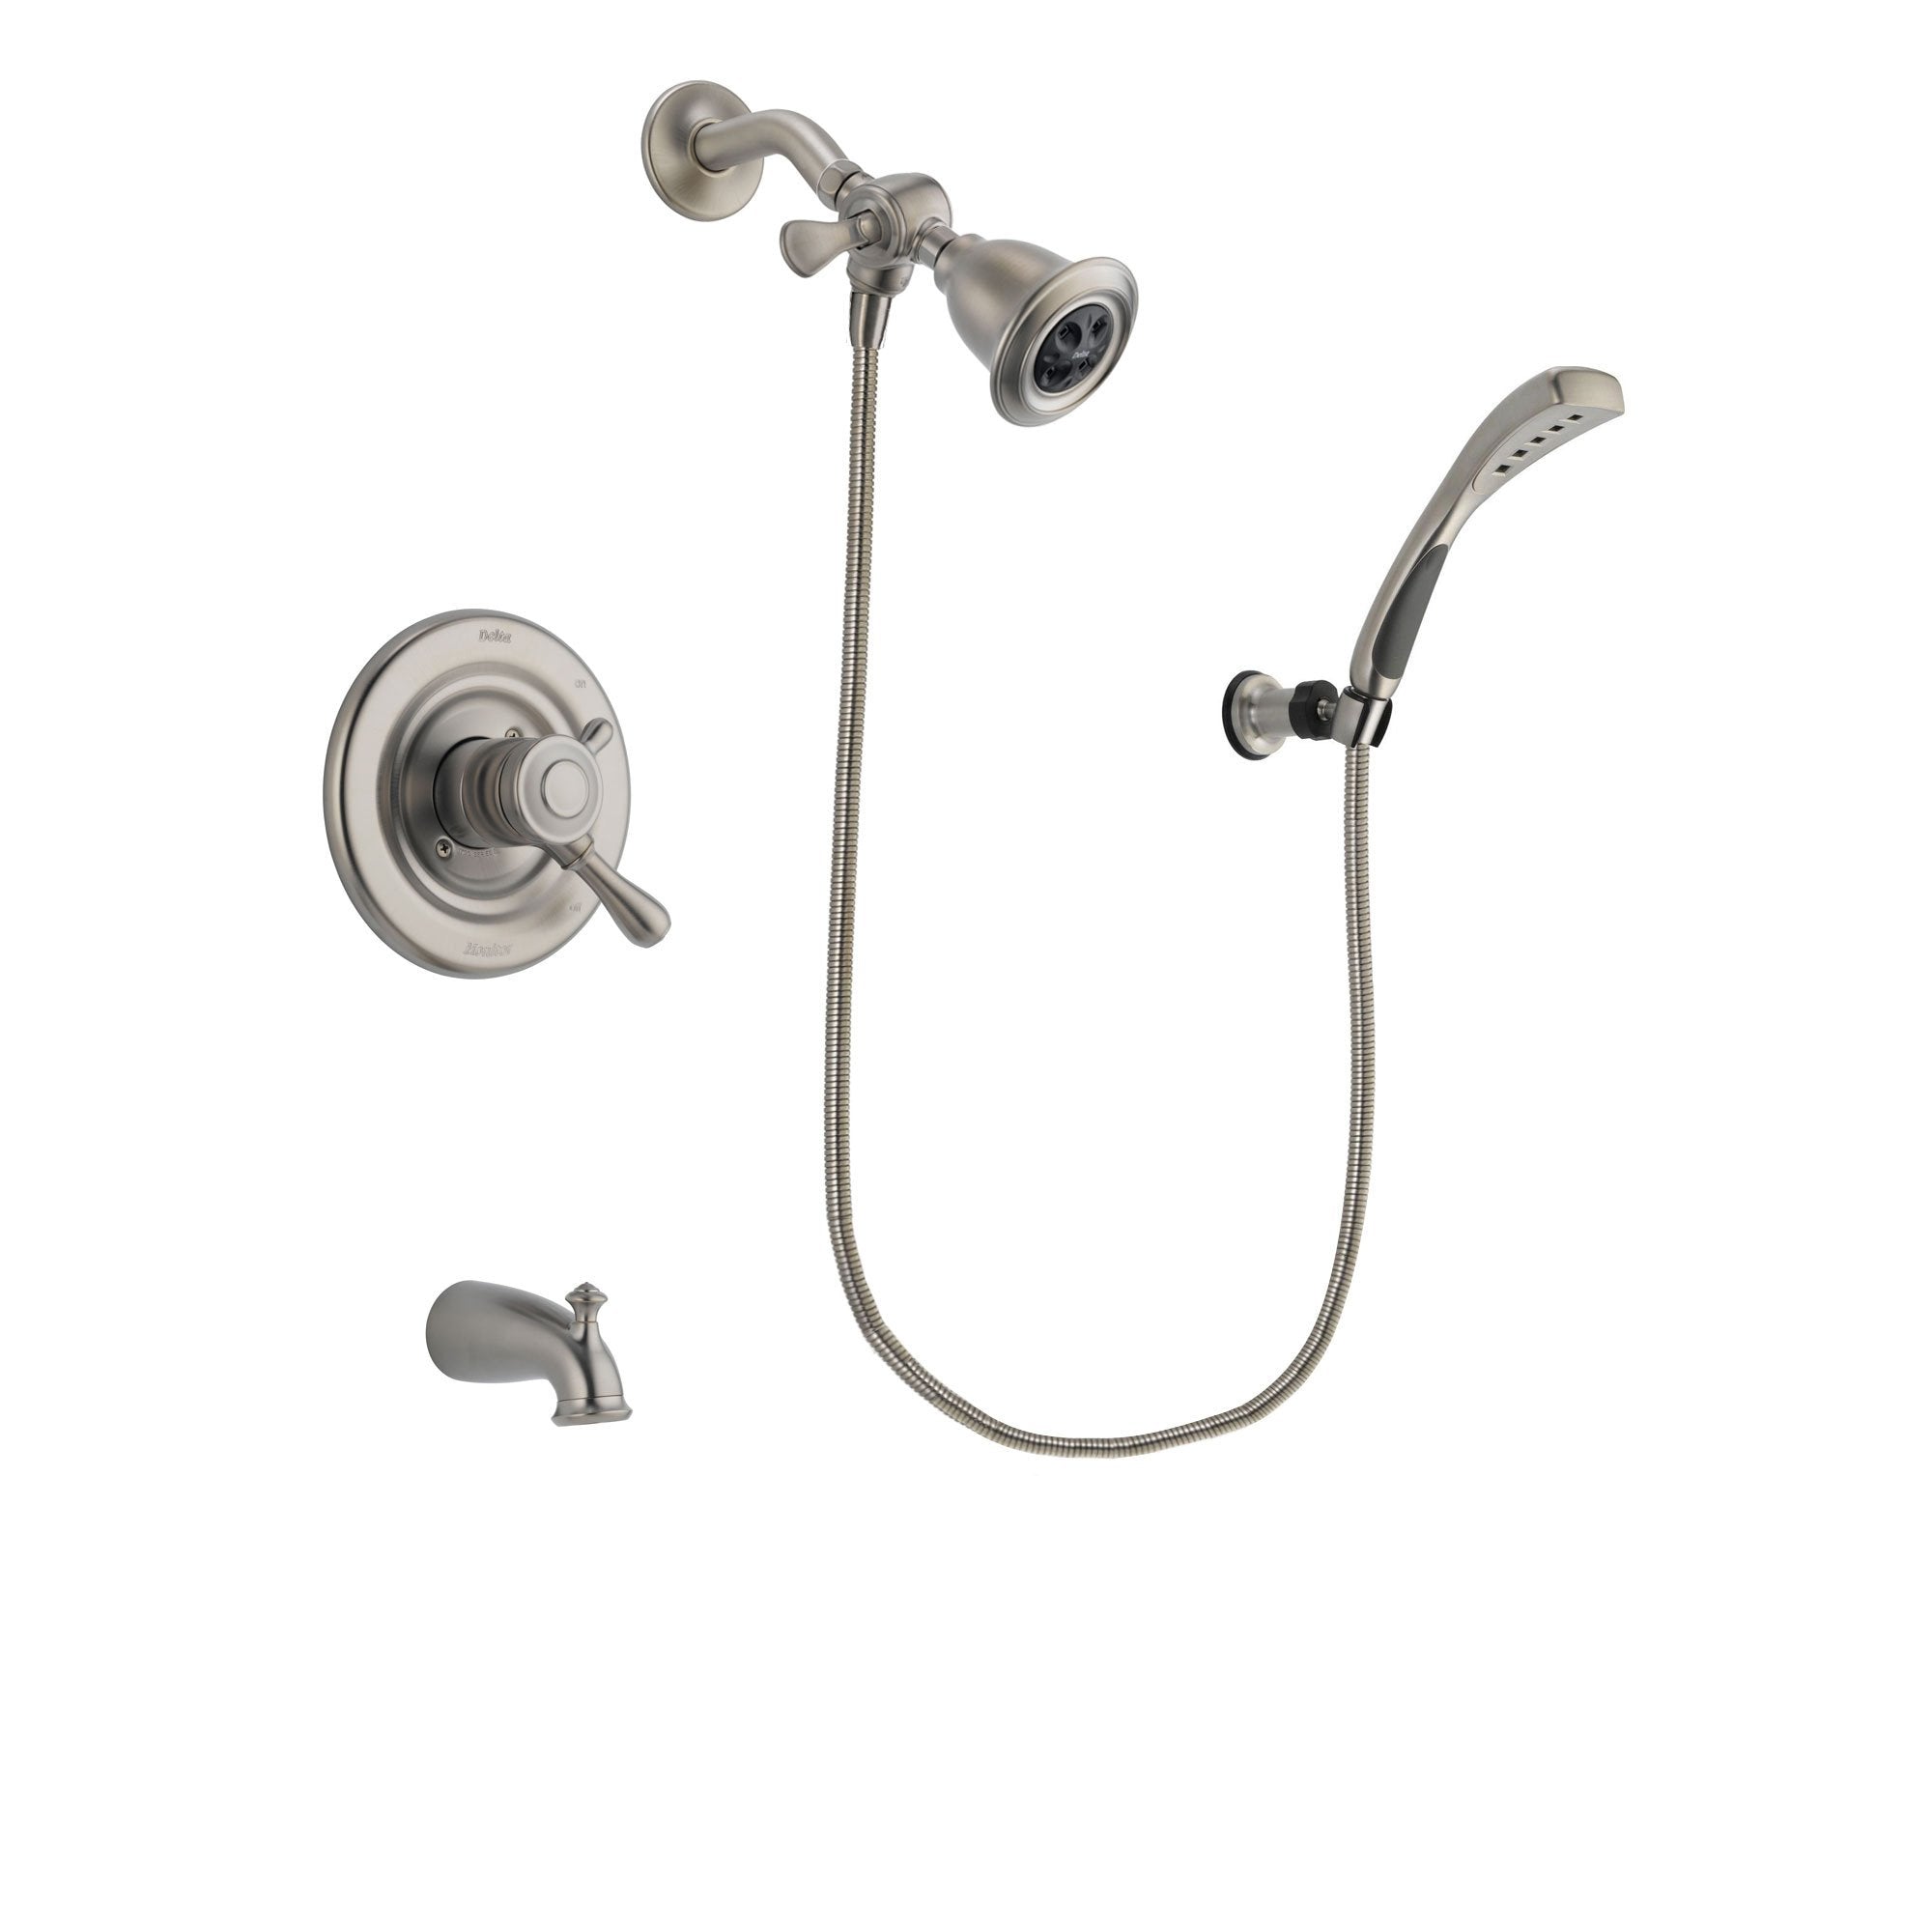 Delta Leland Stainless Steel Finish Dual Control Tub and Shower Faucet System Package with Water Efficient Showerhead and Wall Mounted Handshower Includes Rough-in Valve and Tub Spout DSP1845V